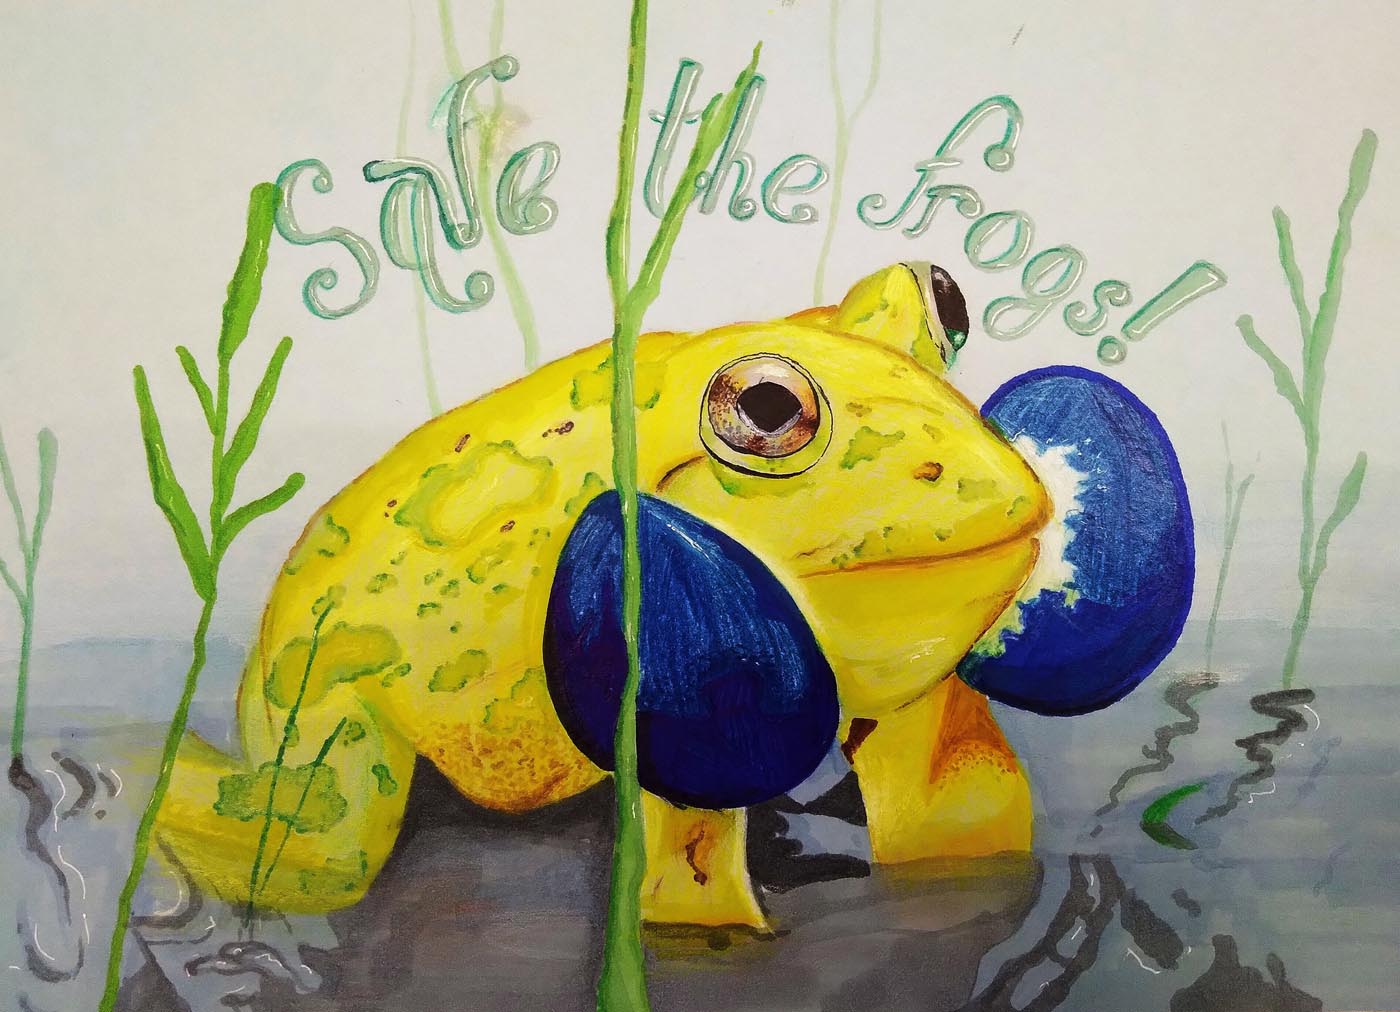 Diana-Yupasheva-Russia-2021-save-the-frogs-art-contest-2